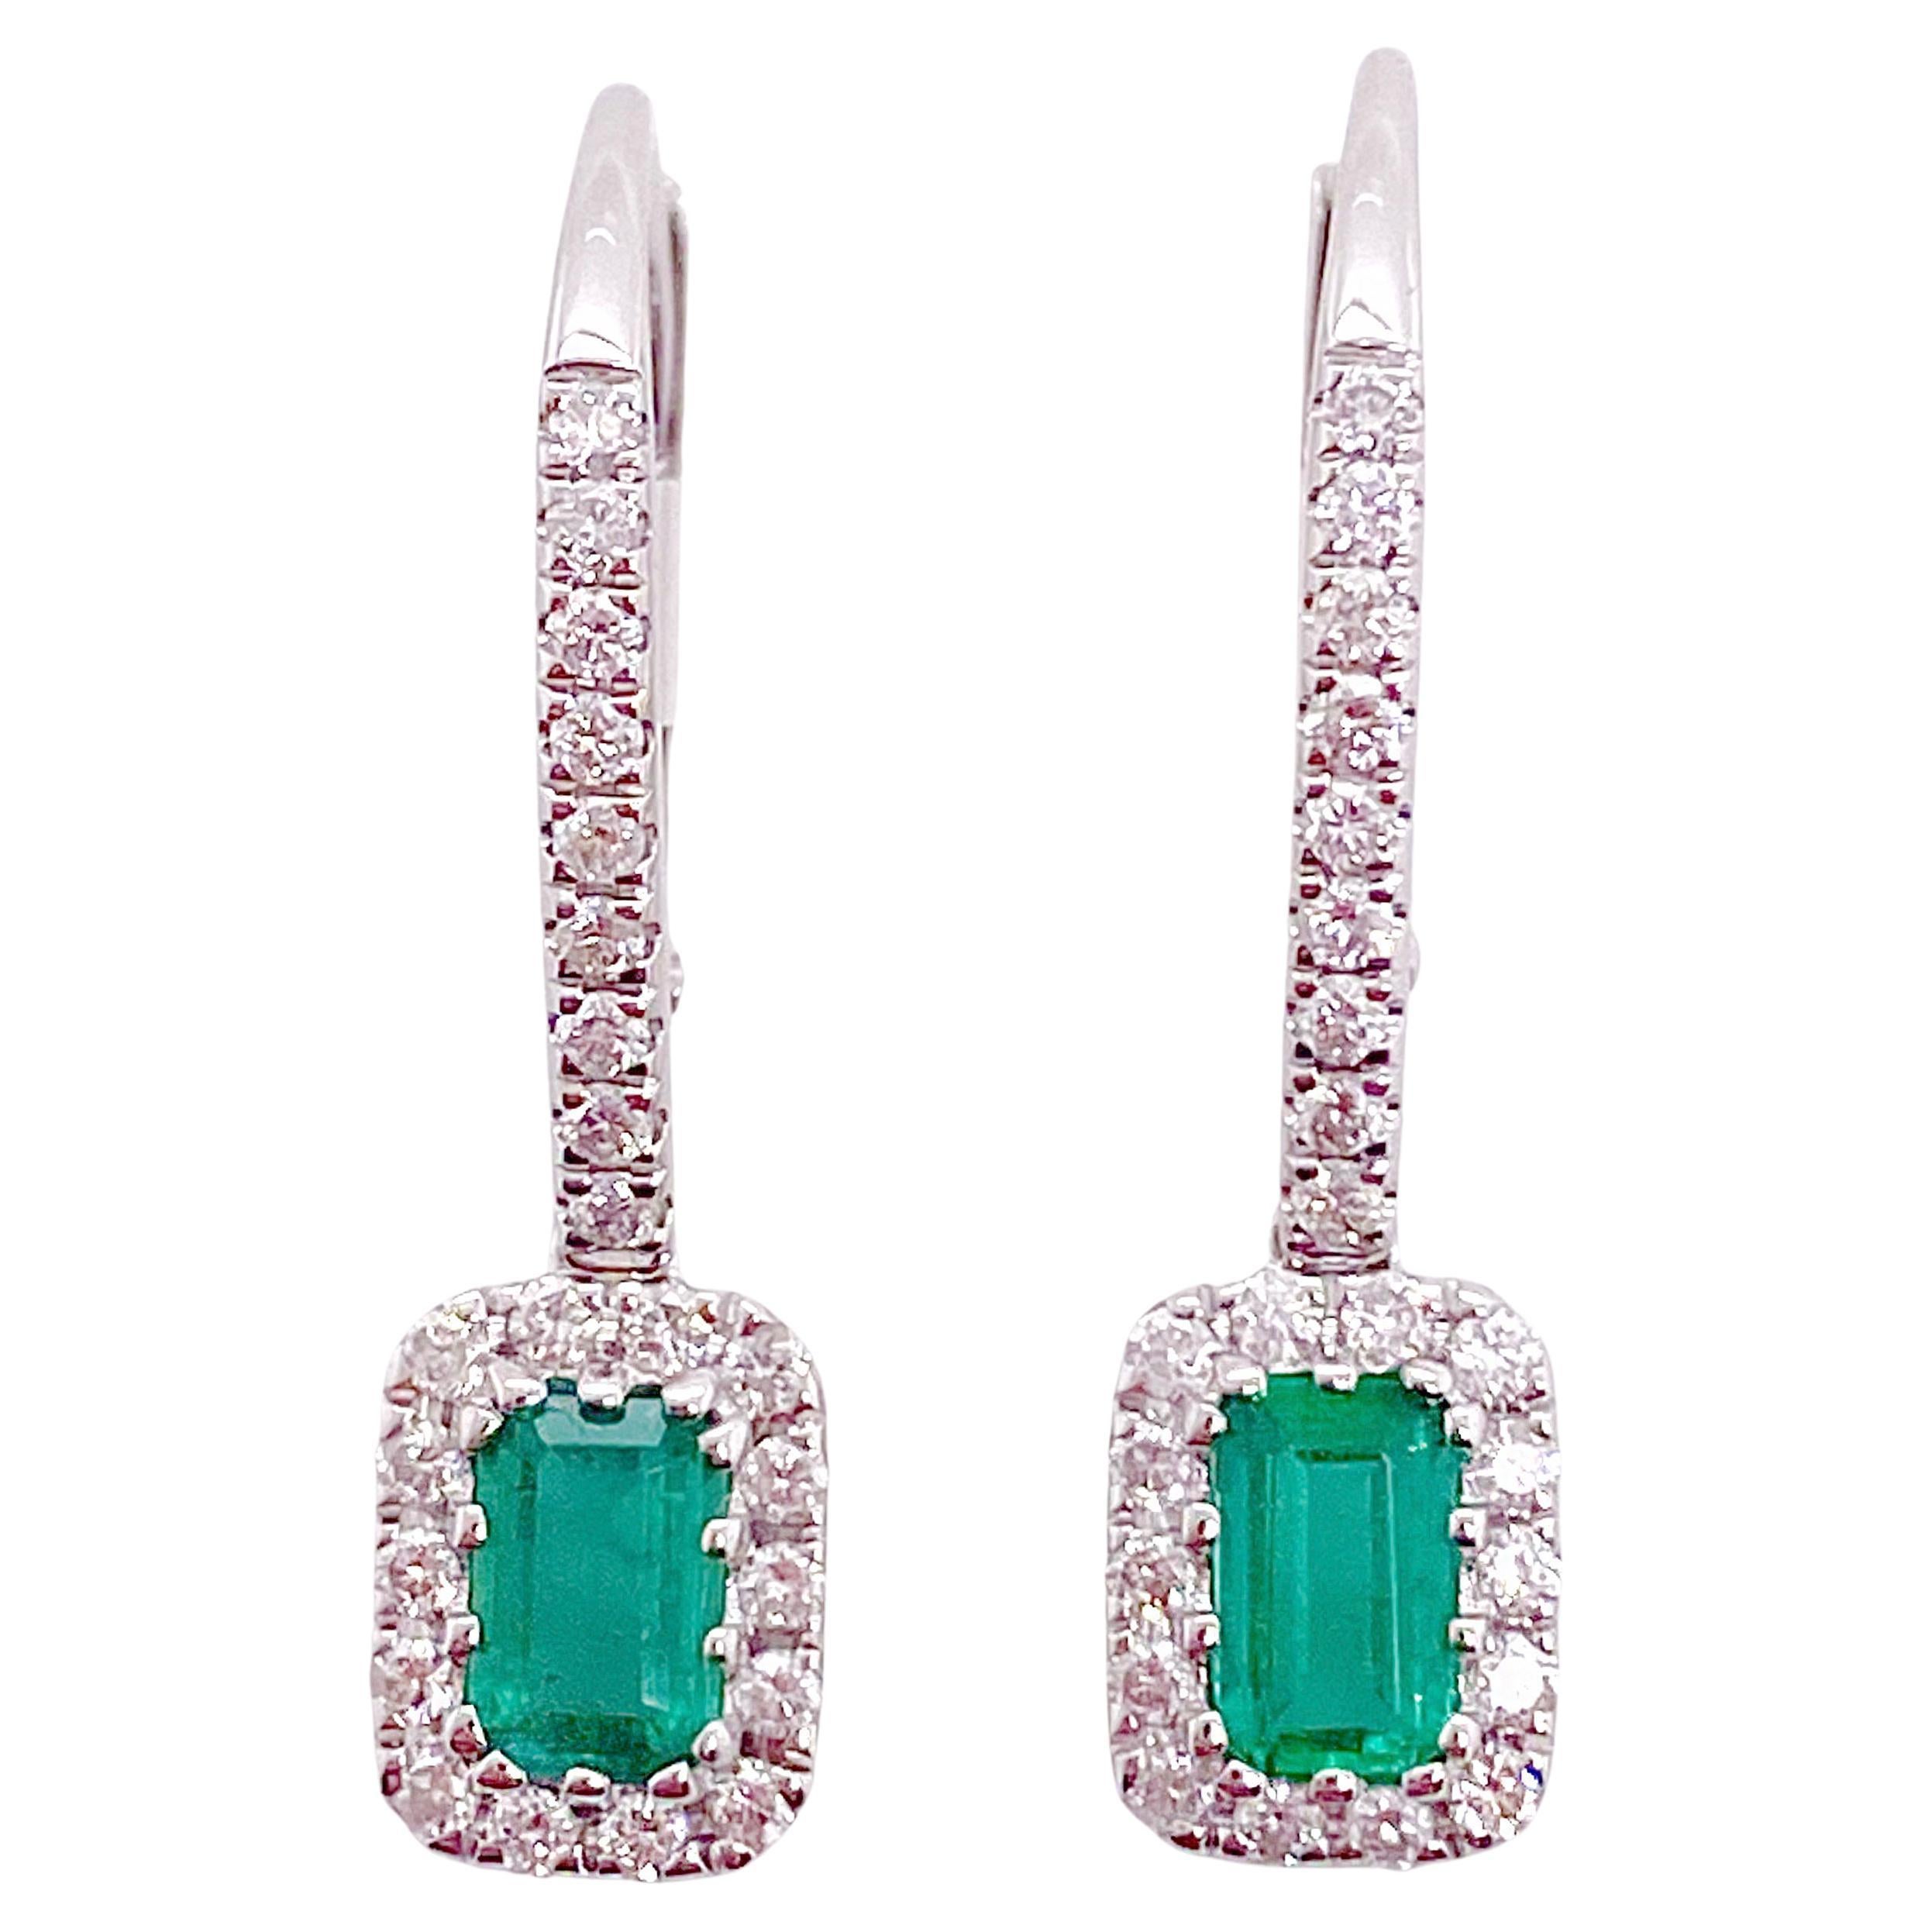 Dangle Emerald Earrings with 48 Natural Diamond Halo in White Gold, Emeralds